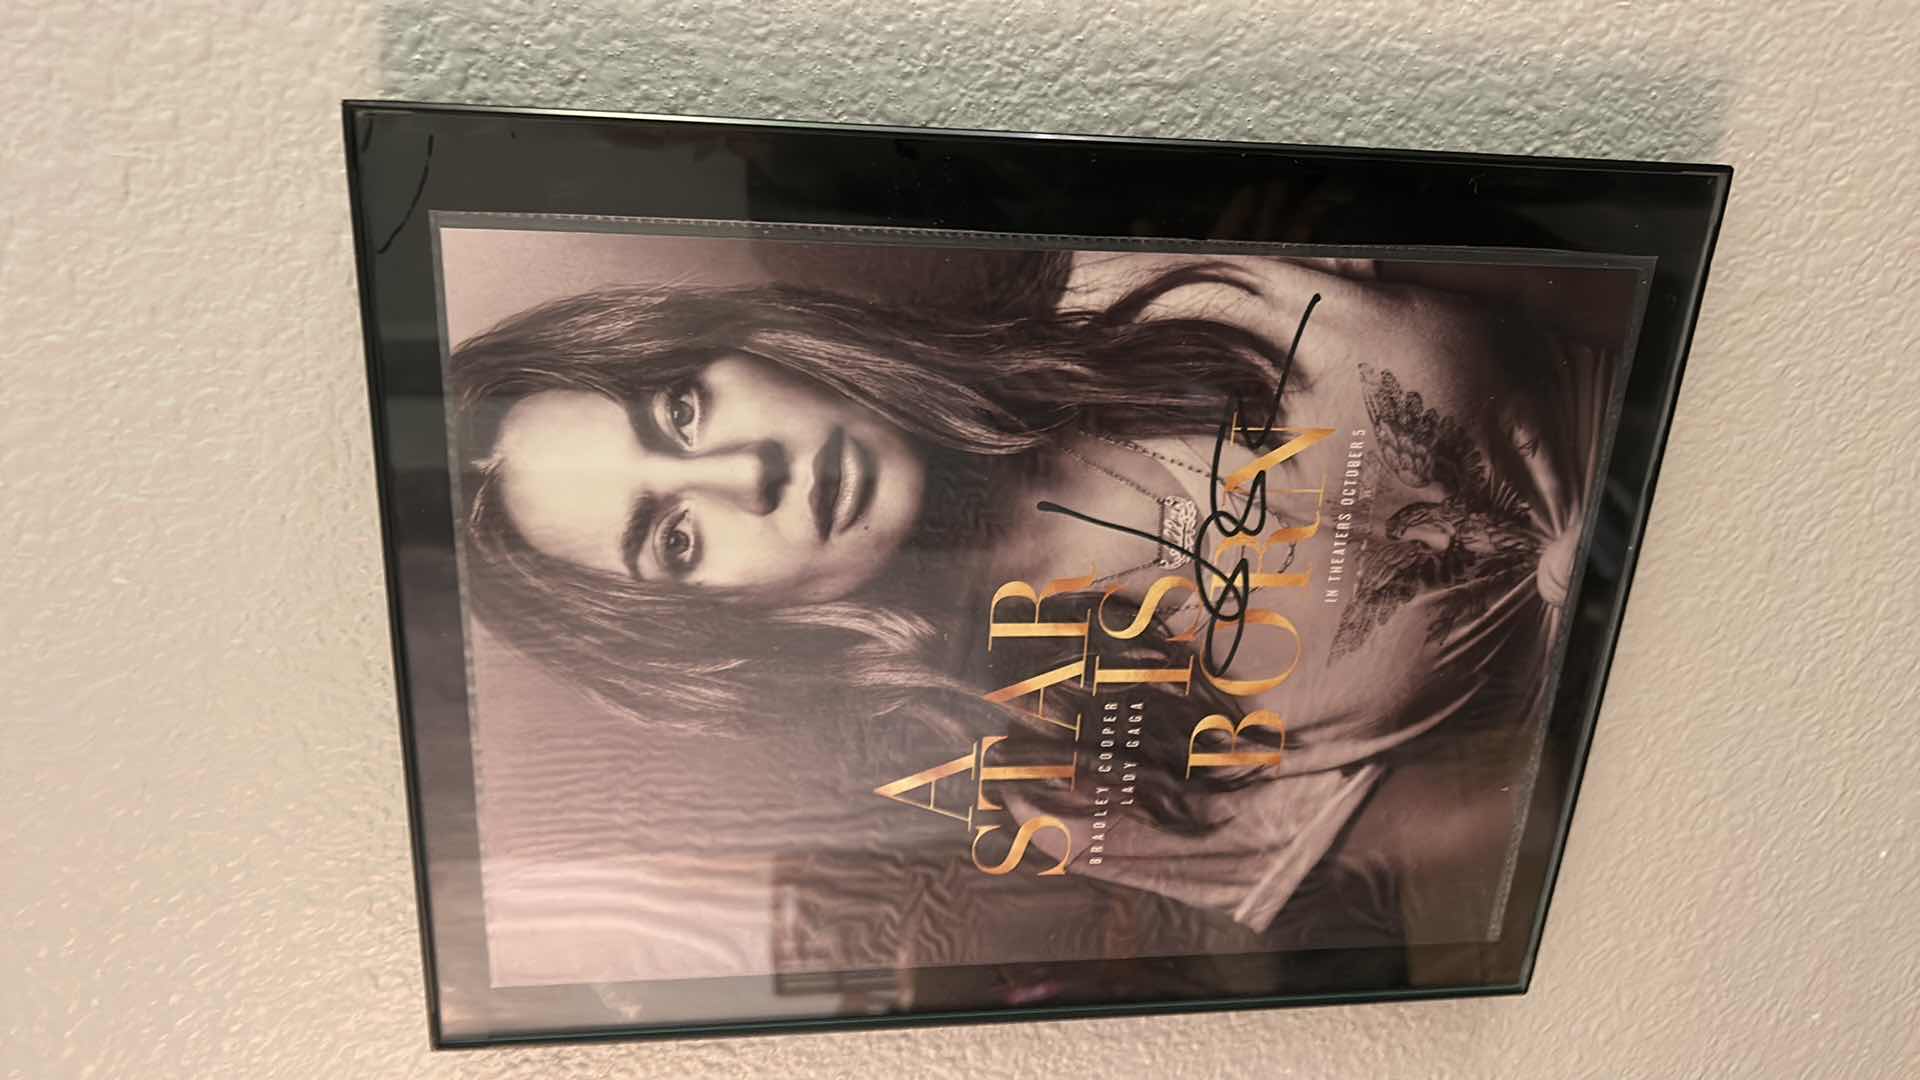 Photo 2 of  “A STAR IS BORN” AUTOGRAPHED PHOTO WITH BRADLEY COOPER AND LADY GAGA ARTWORK FRAMED 10” x 13”